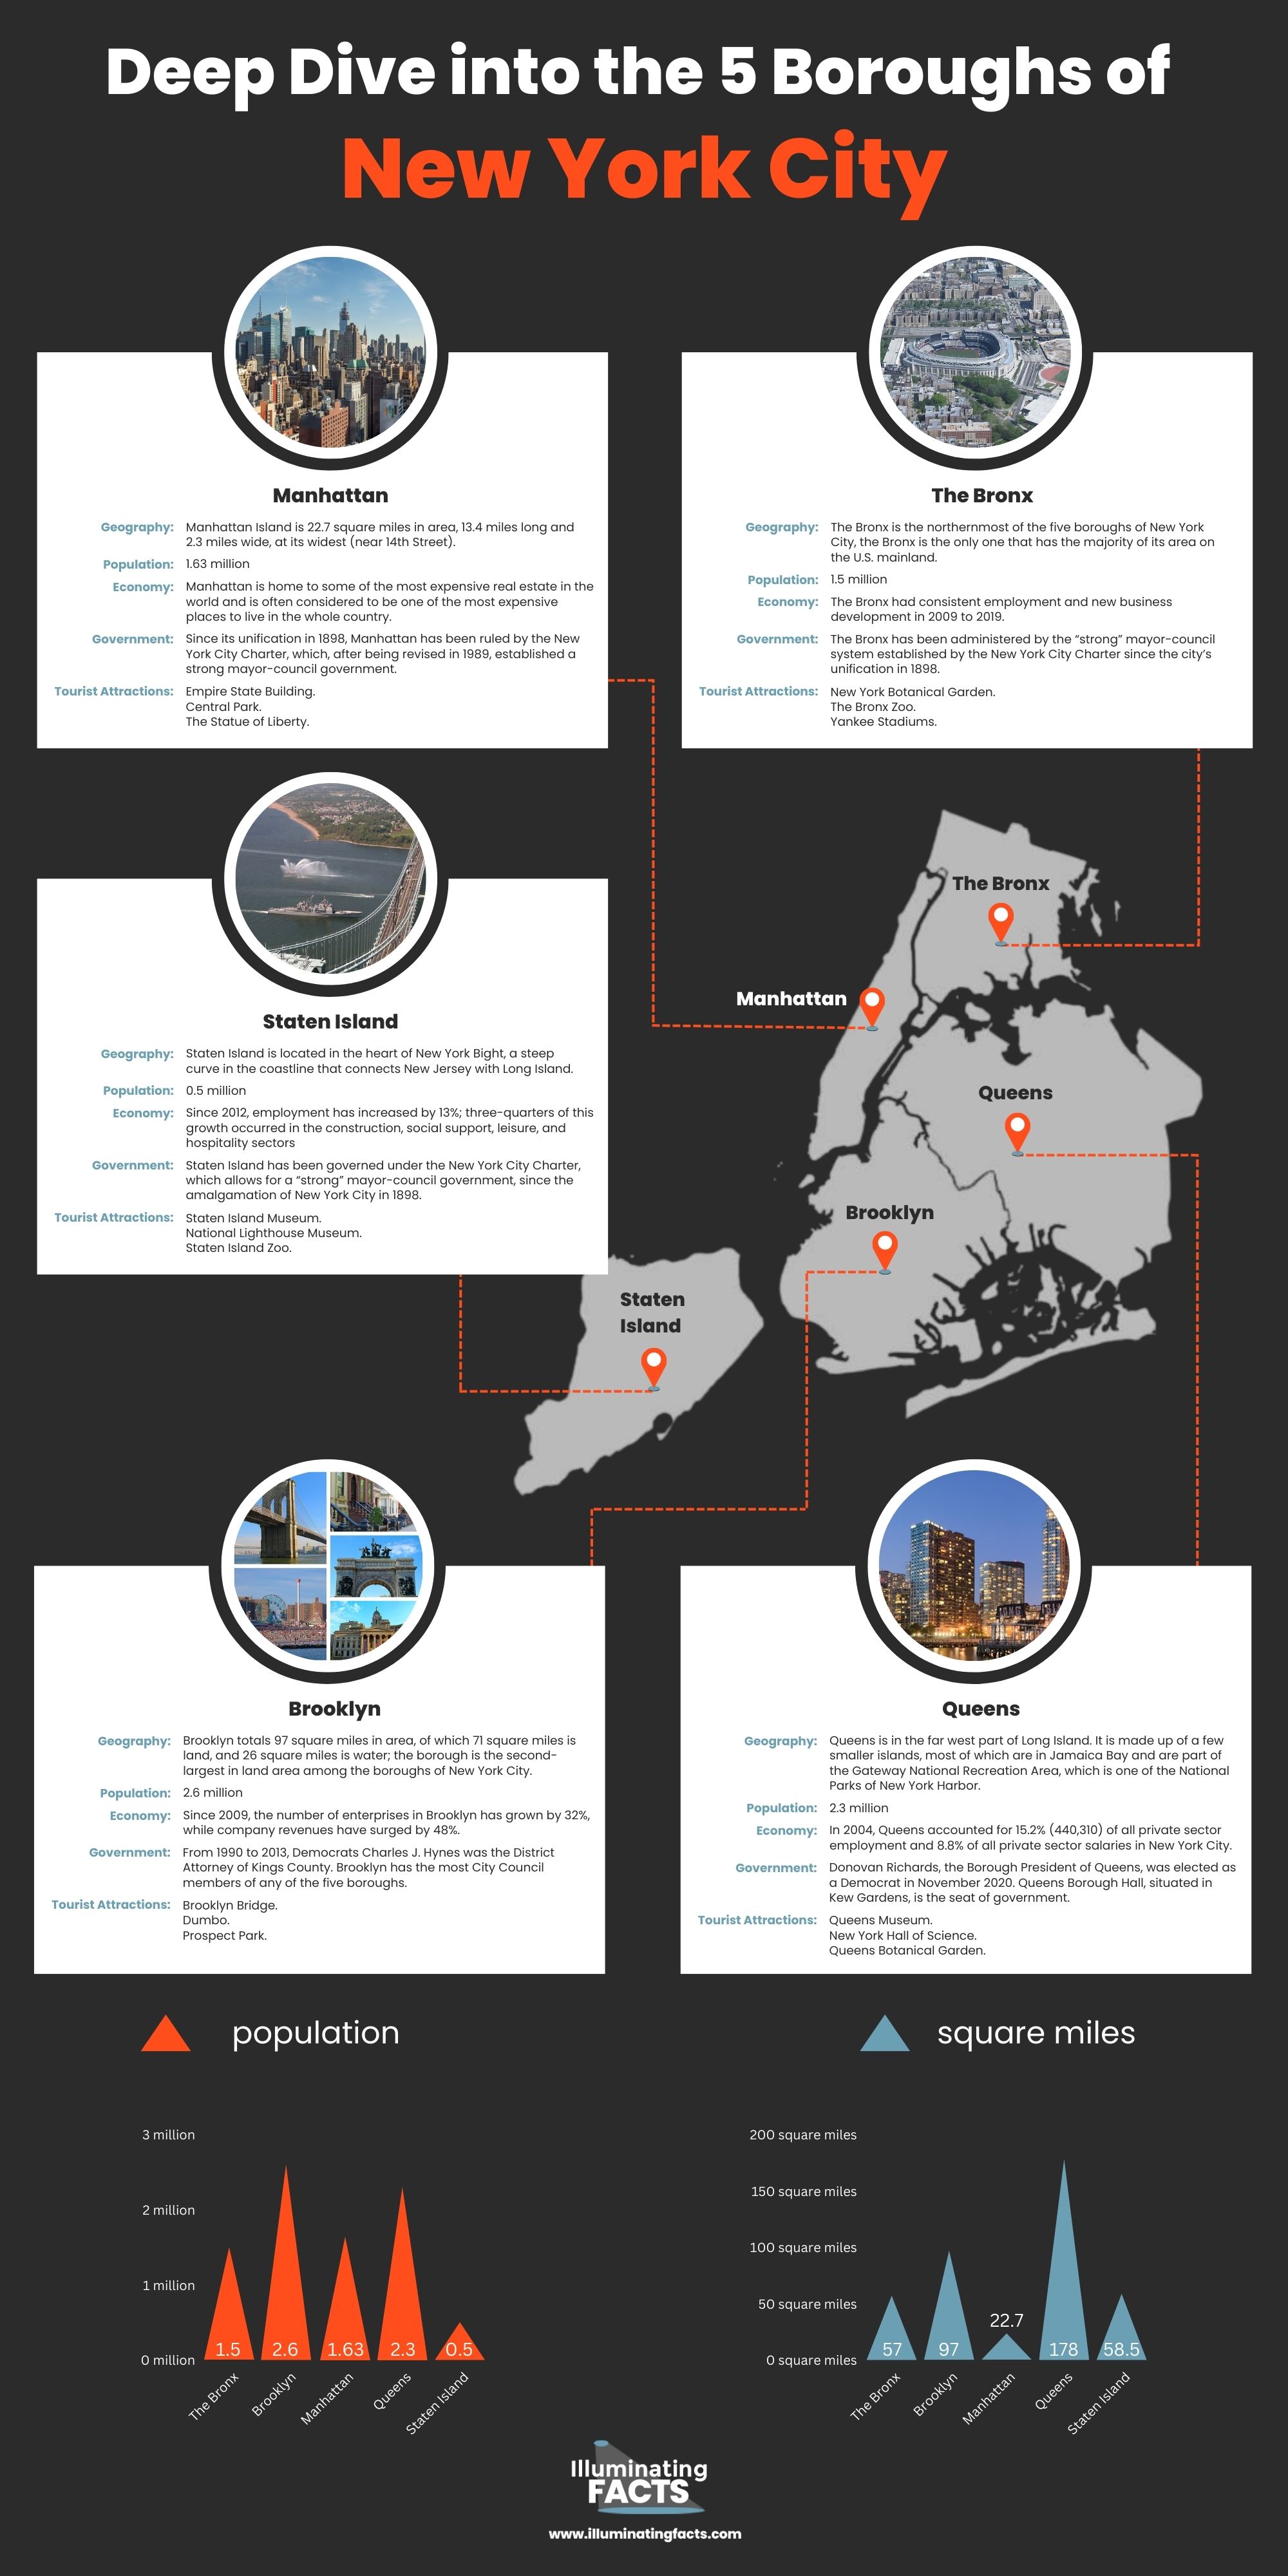 Deep Dive into the 5 Boroughs of New York City